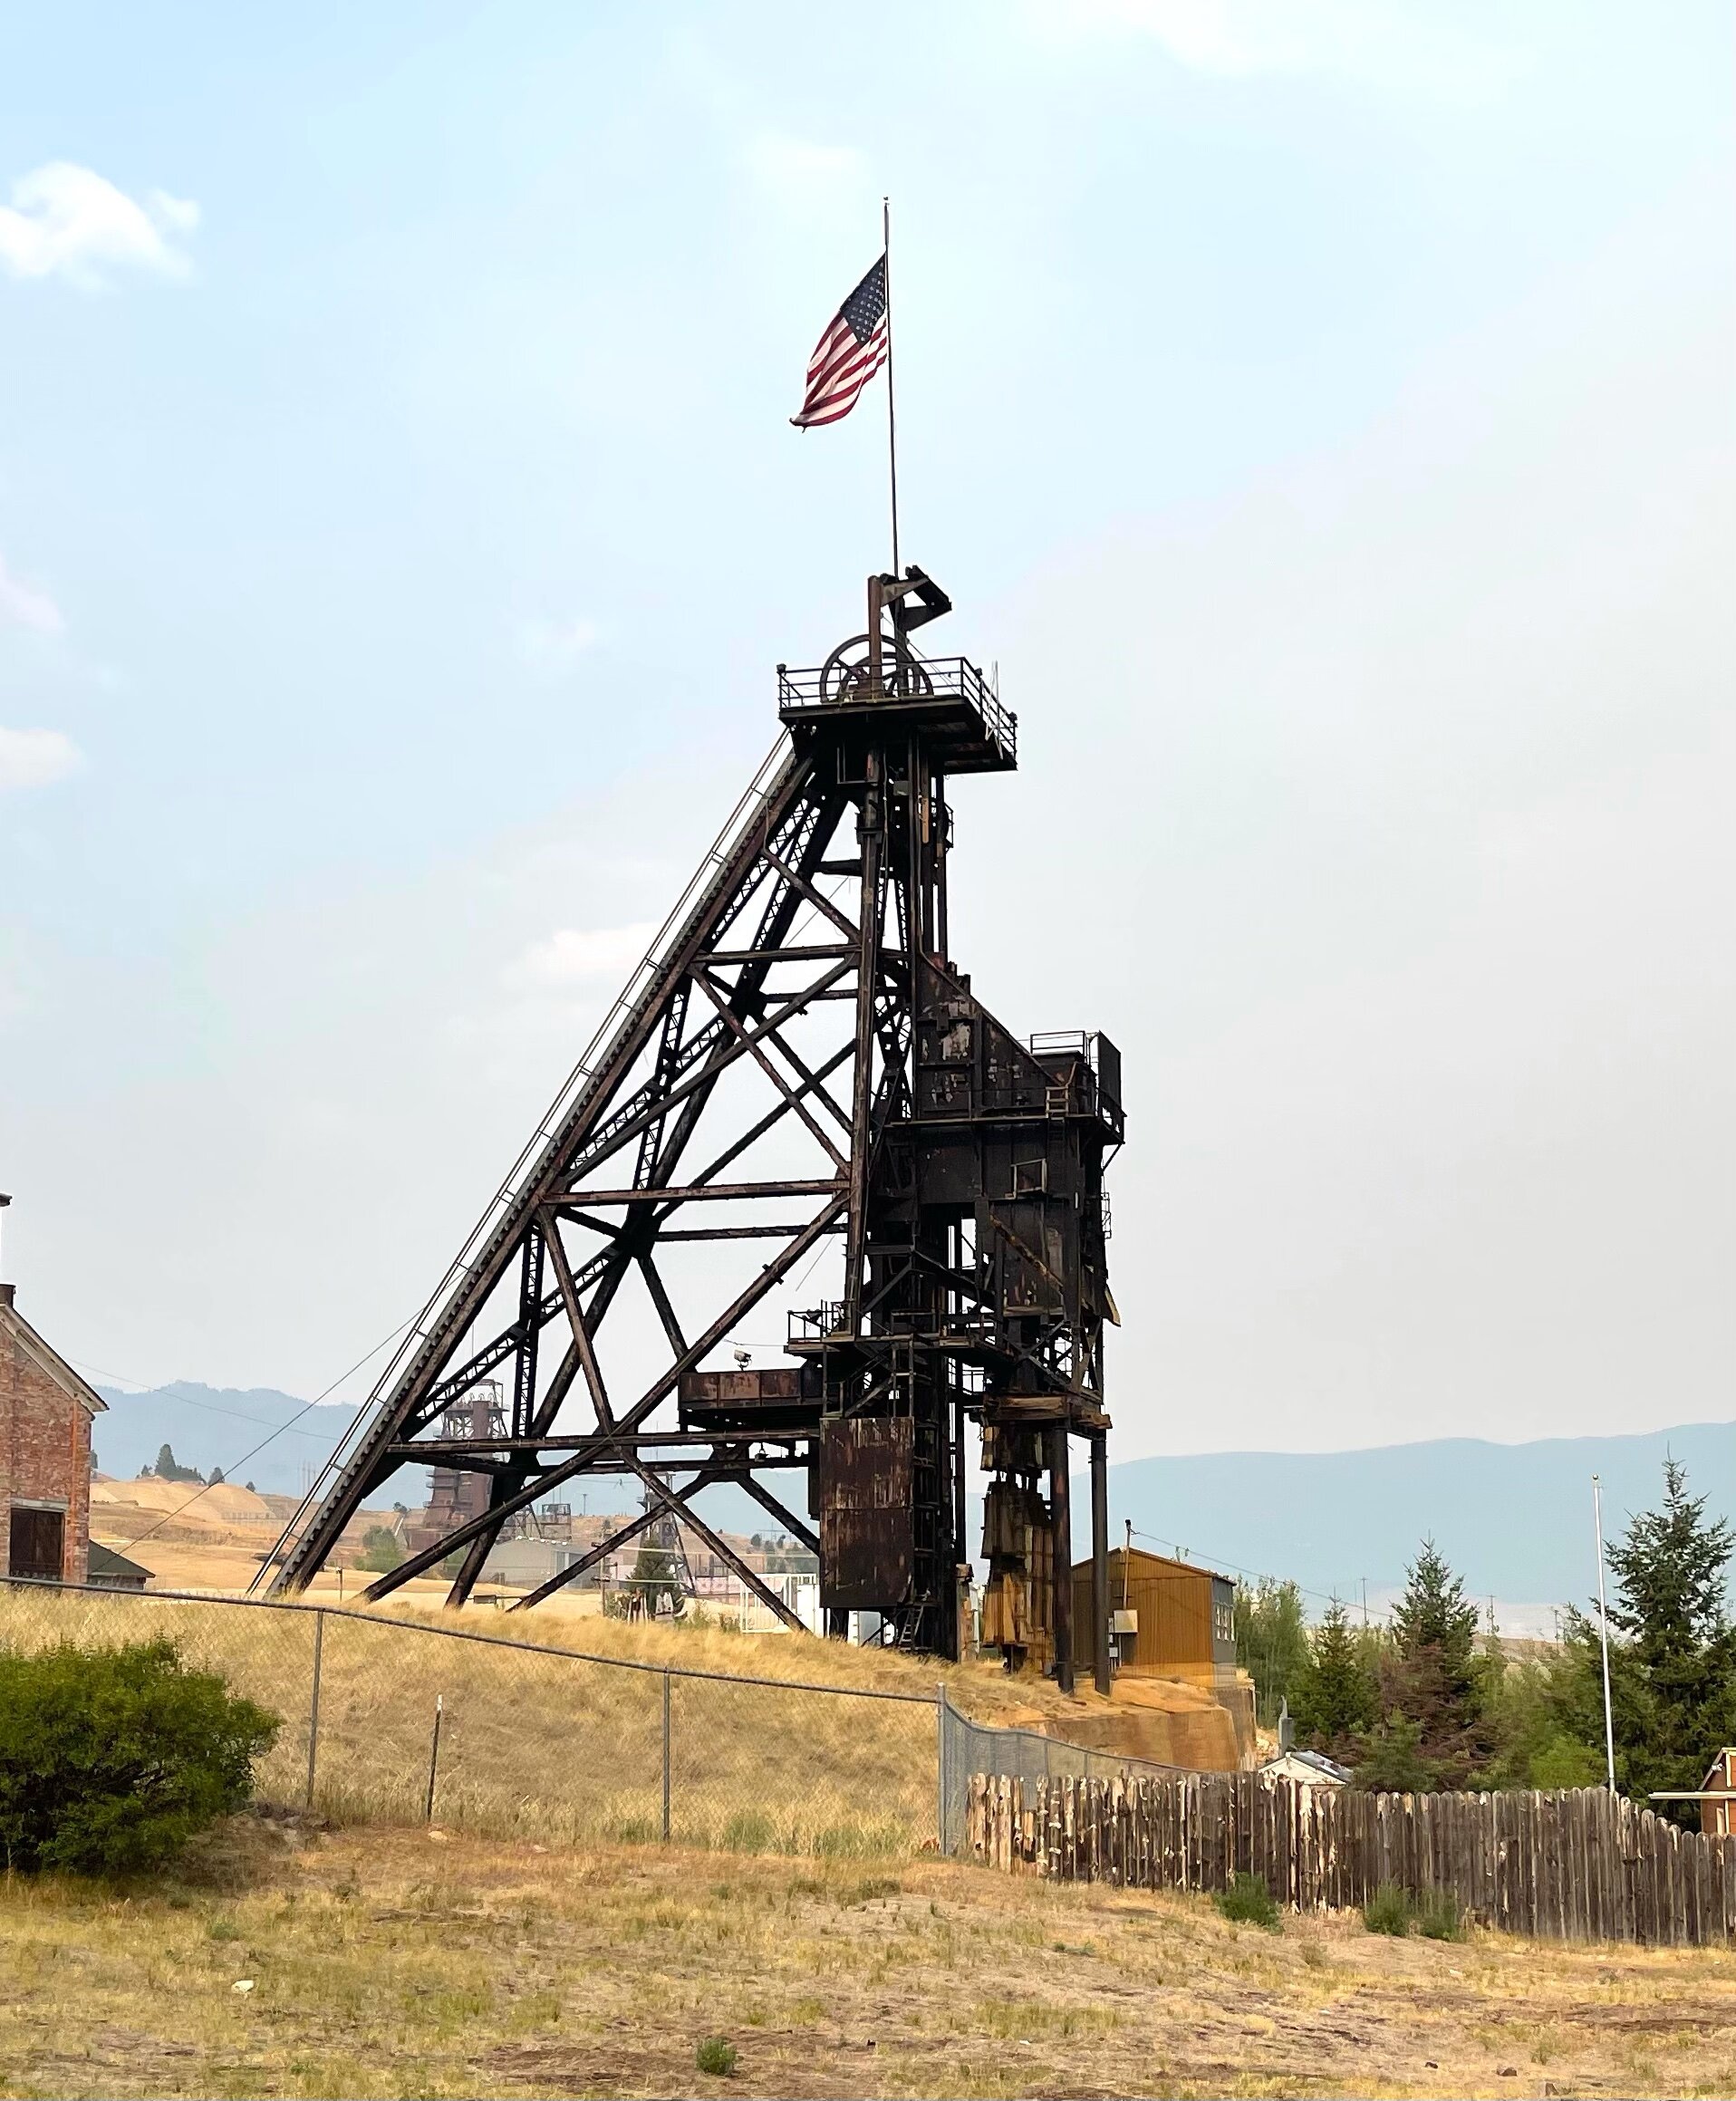  Butte's population and the economy tanked in the 1970s, and in 2000, mining stopped altogether. In  2002, mining started again due to significantly rising copper prices. Today 370 people still work in this ragged little town, pulling copper out of t